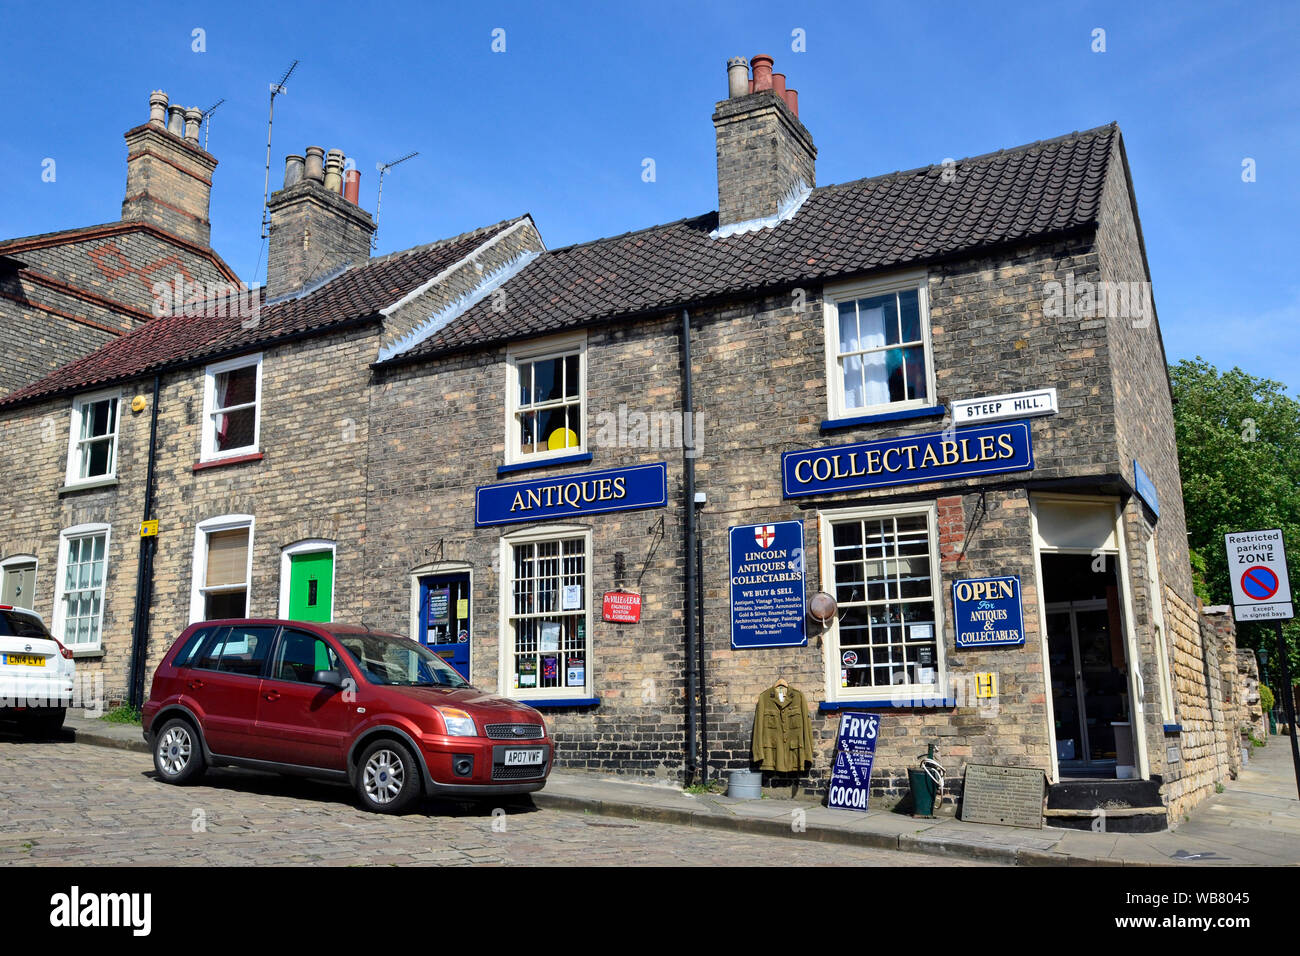 Lincoln Antiques and Collectibles shop on Steep Hill, n Lincoln City Centre, Lincolnshire, UK Stock Photo